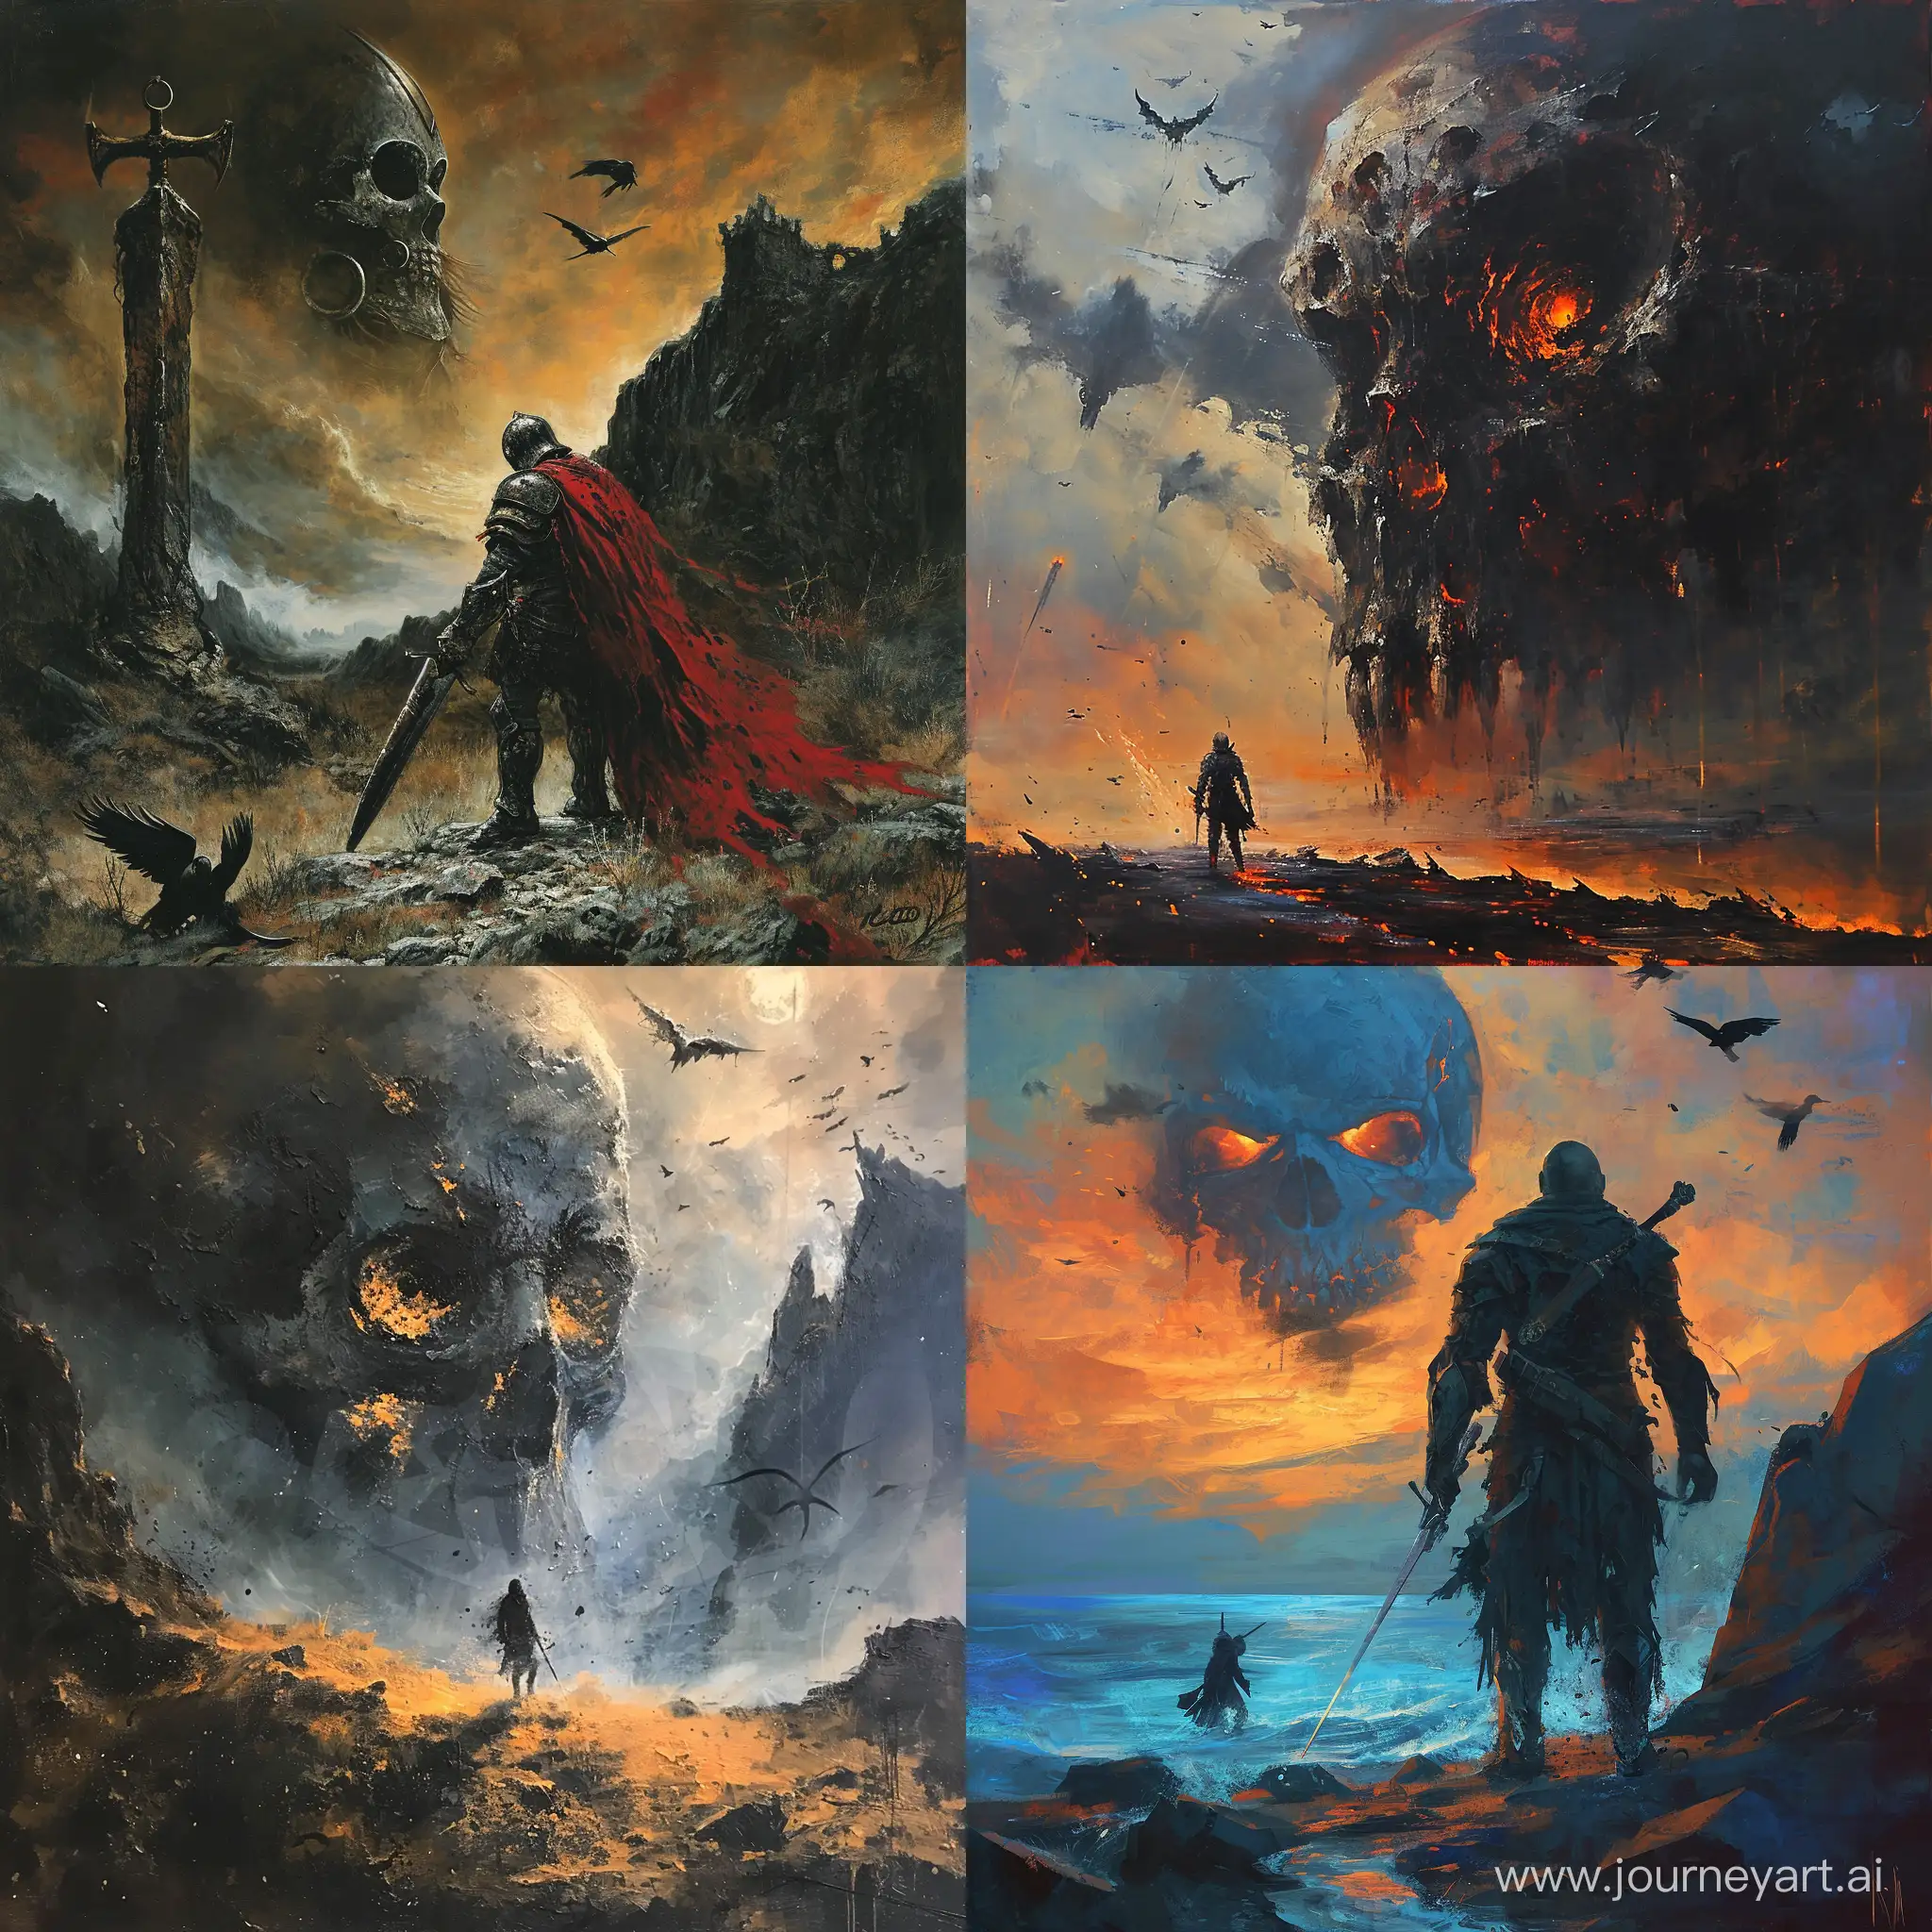 Acrylic paint, ::1.5. a warrior stands in a desolate land with a giant skull looming above them. The warrior is equipped with a sword and shield, there is a skull with glowing eyes in the background. The scene is set at dusk, there are crows flying around. высокое разрешение, высокая чёткость, чёткое изображение, микро детализация, высокая детализация, ультра реализация, максимальная детализация, много деталей, глубокие детали, детальное изображение, четкие линии. --v 6